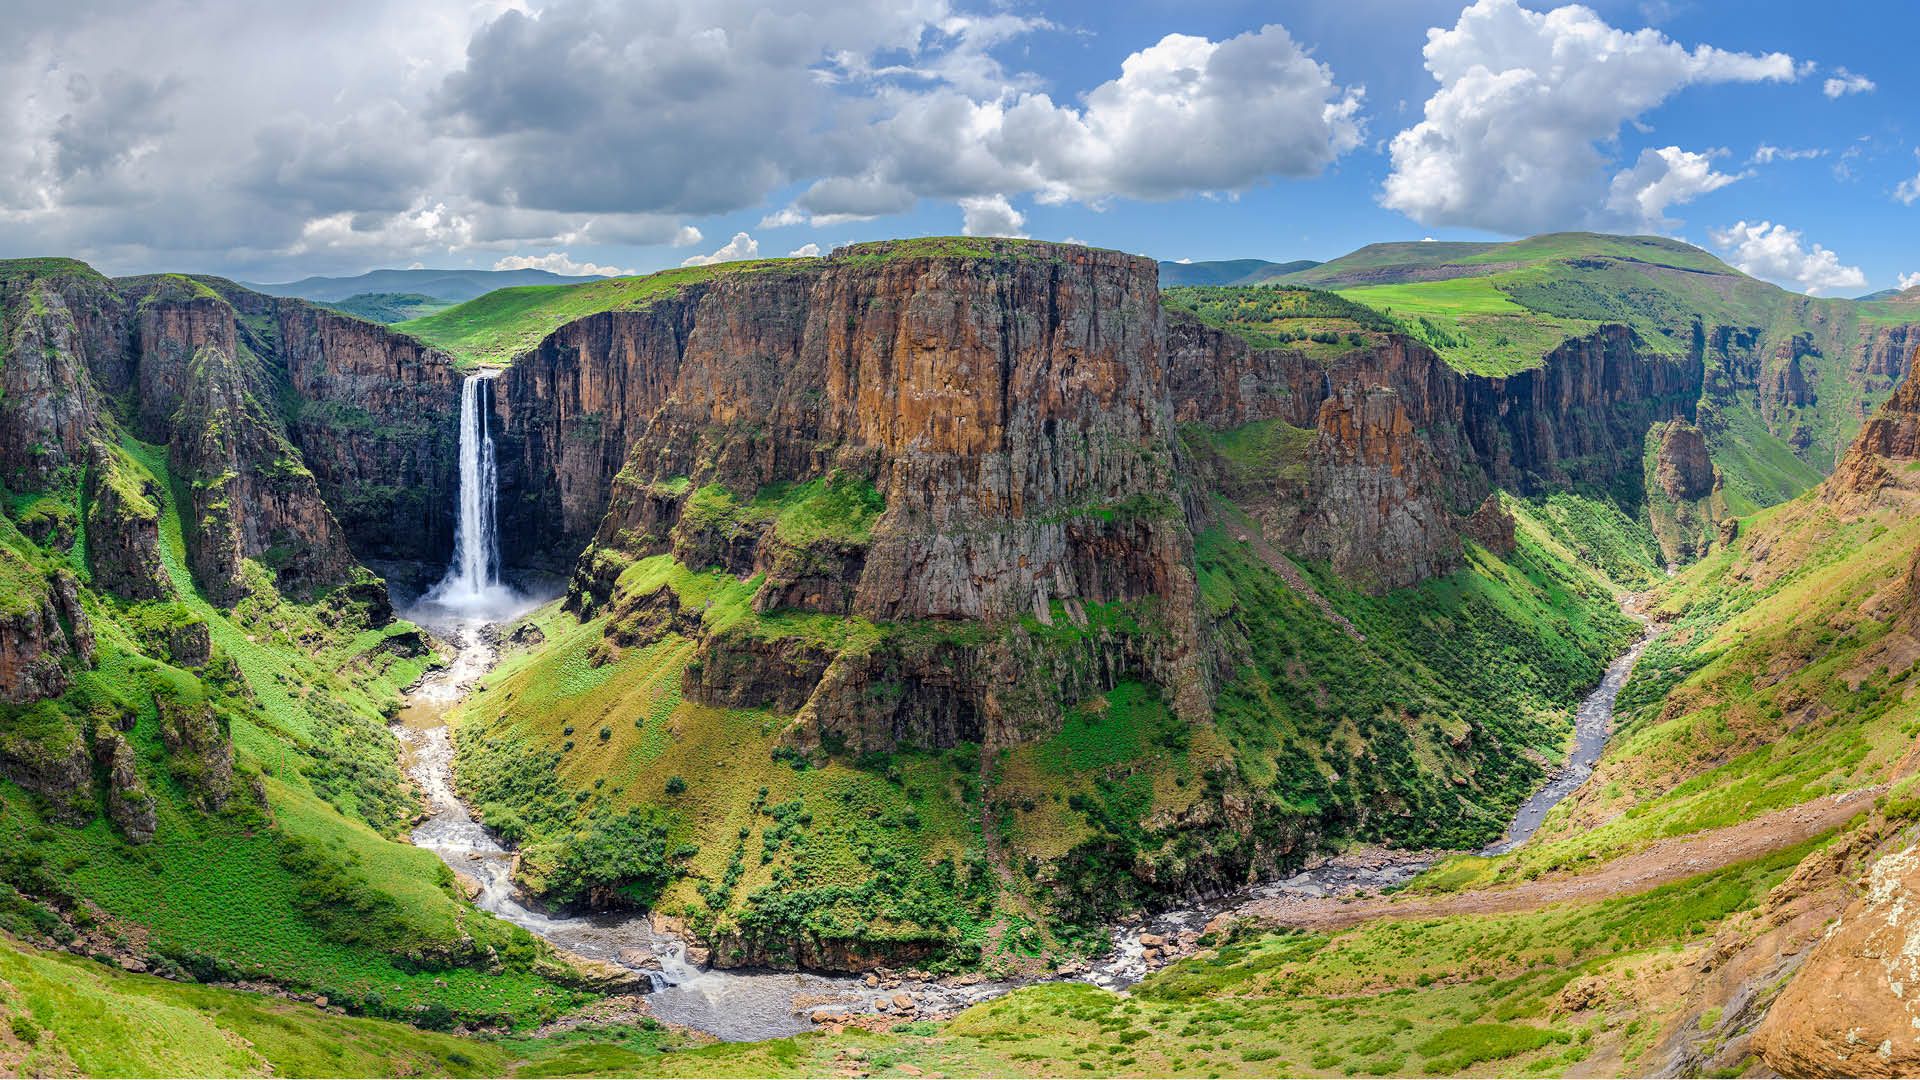 With PayPorter, you can make fast, easy and safe money transfers to Lesotho at the most affordable prices!